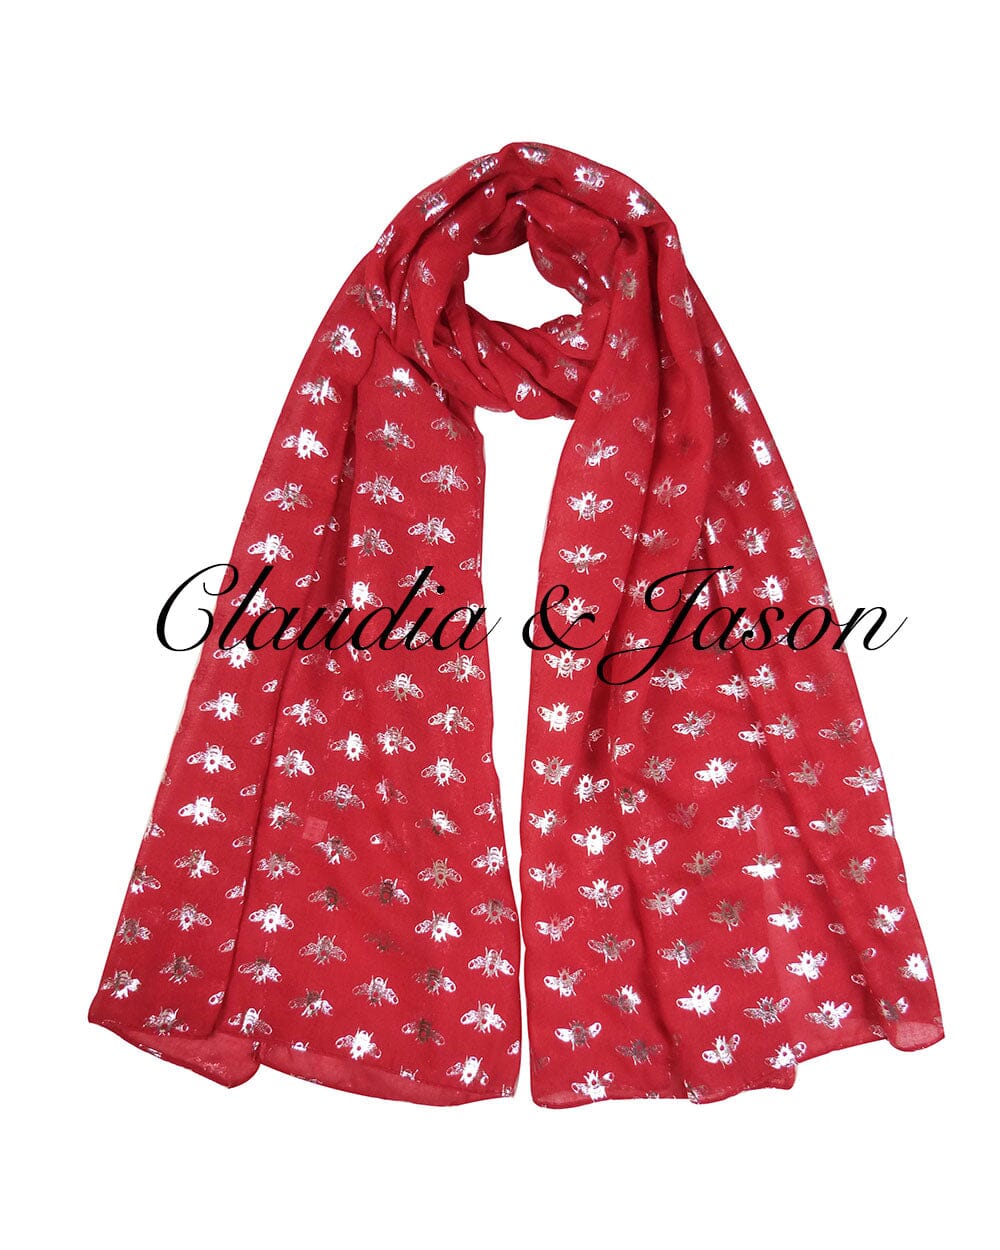 Glitter Silver Bees Printed Scarf Claudia & Jason Scarfs Red 